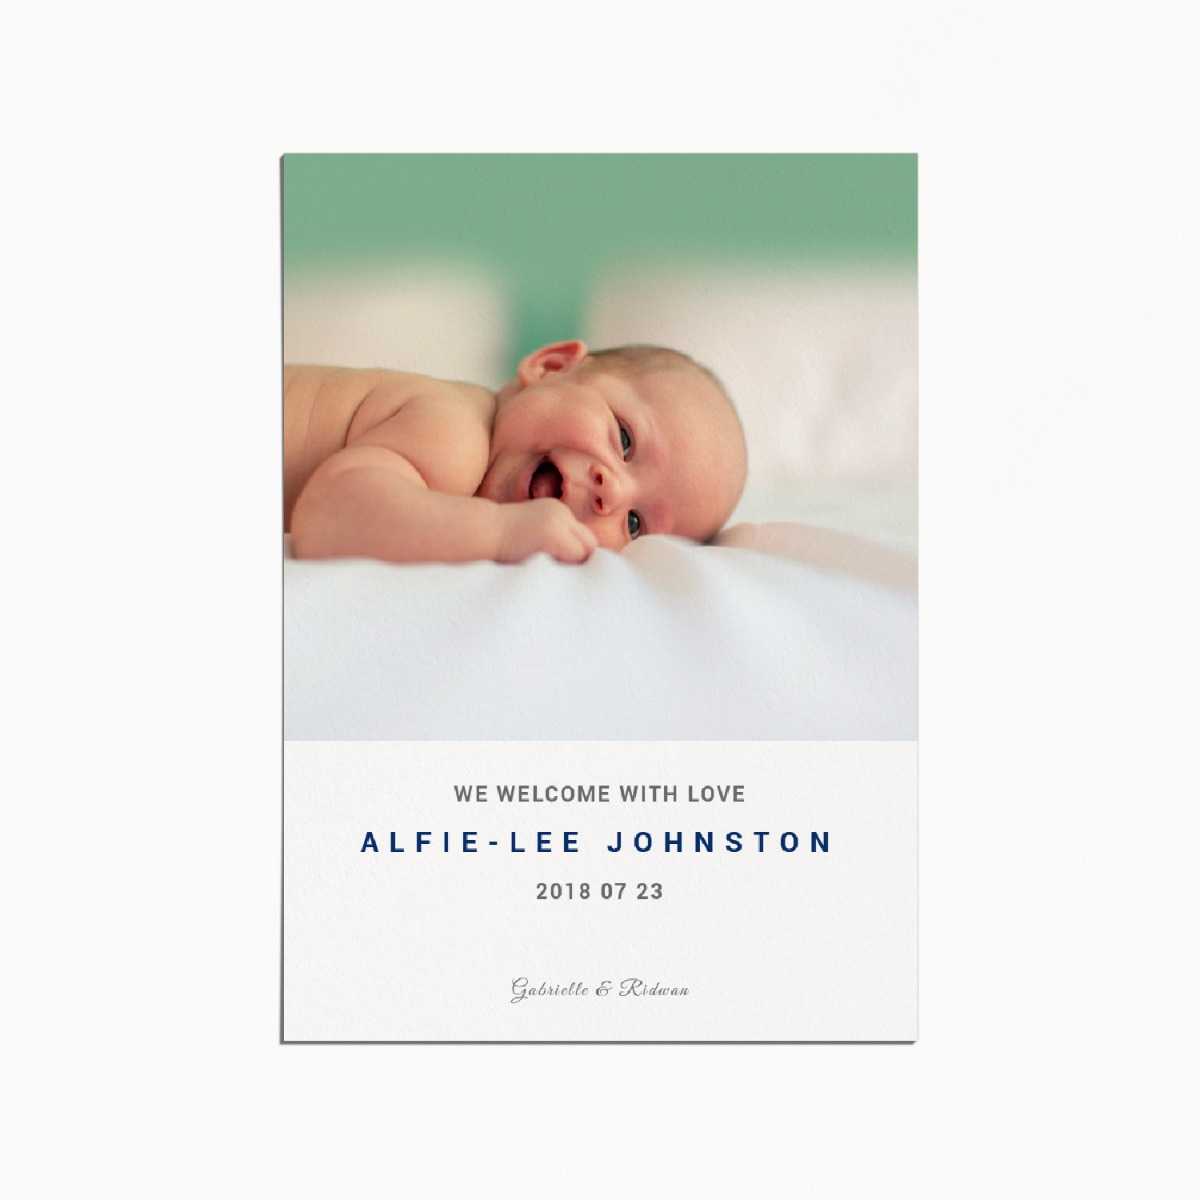 birth announcement card with an image of a smiling baby lying on their belly